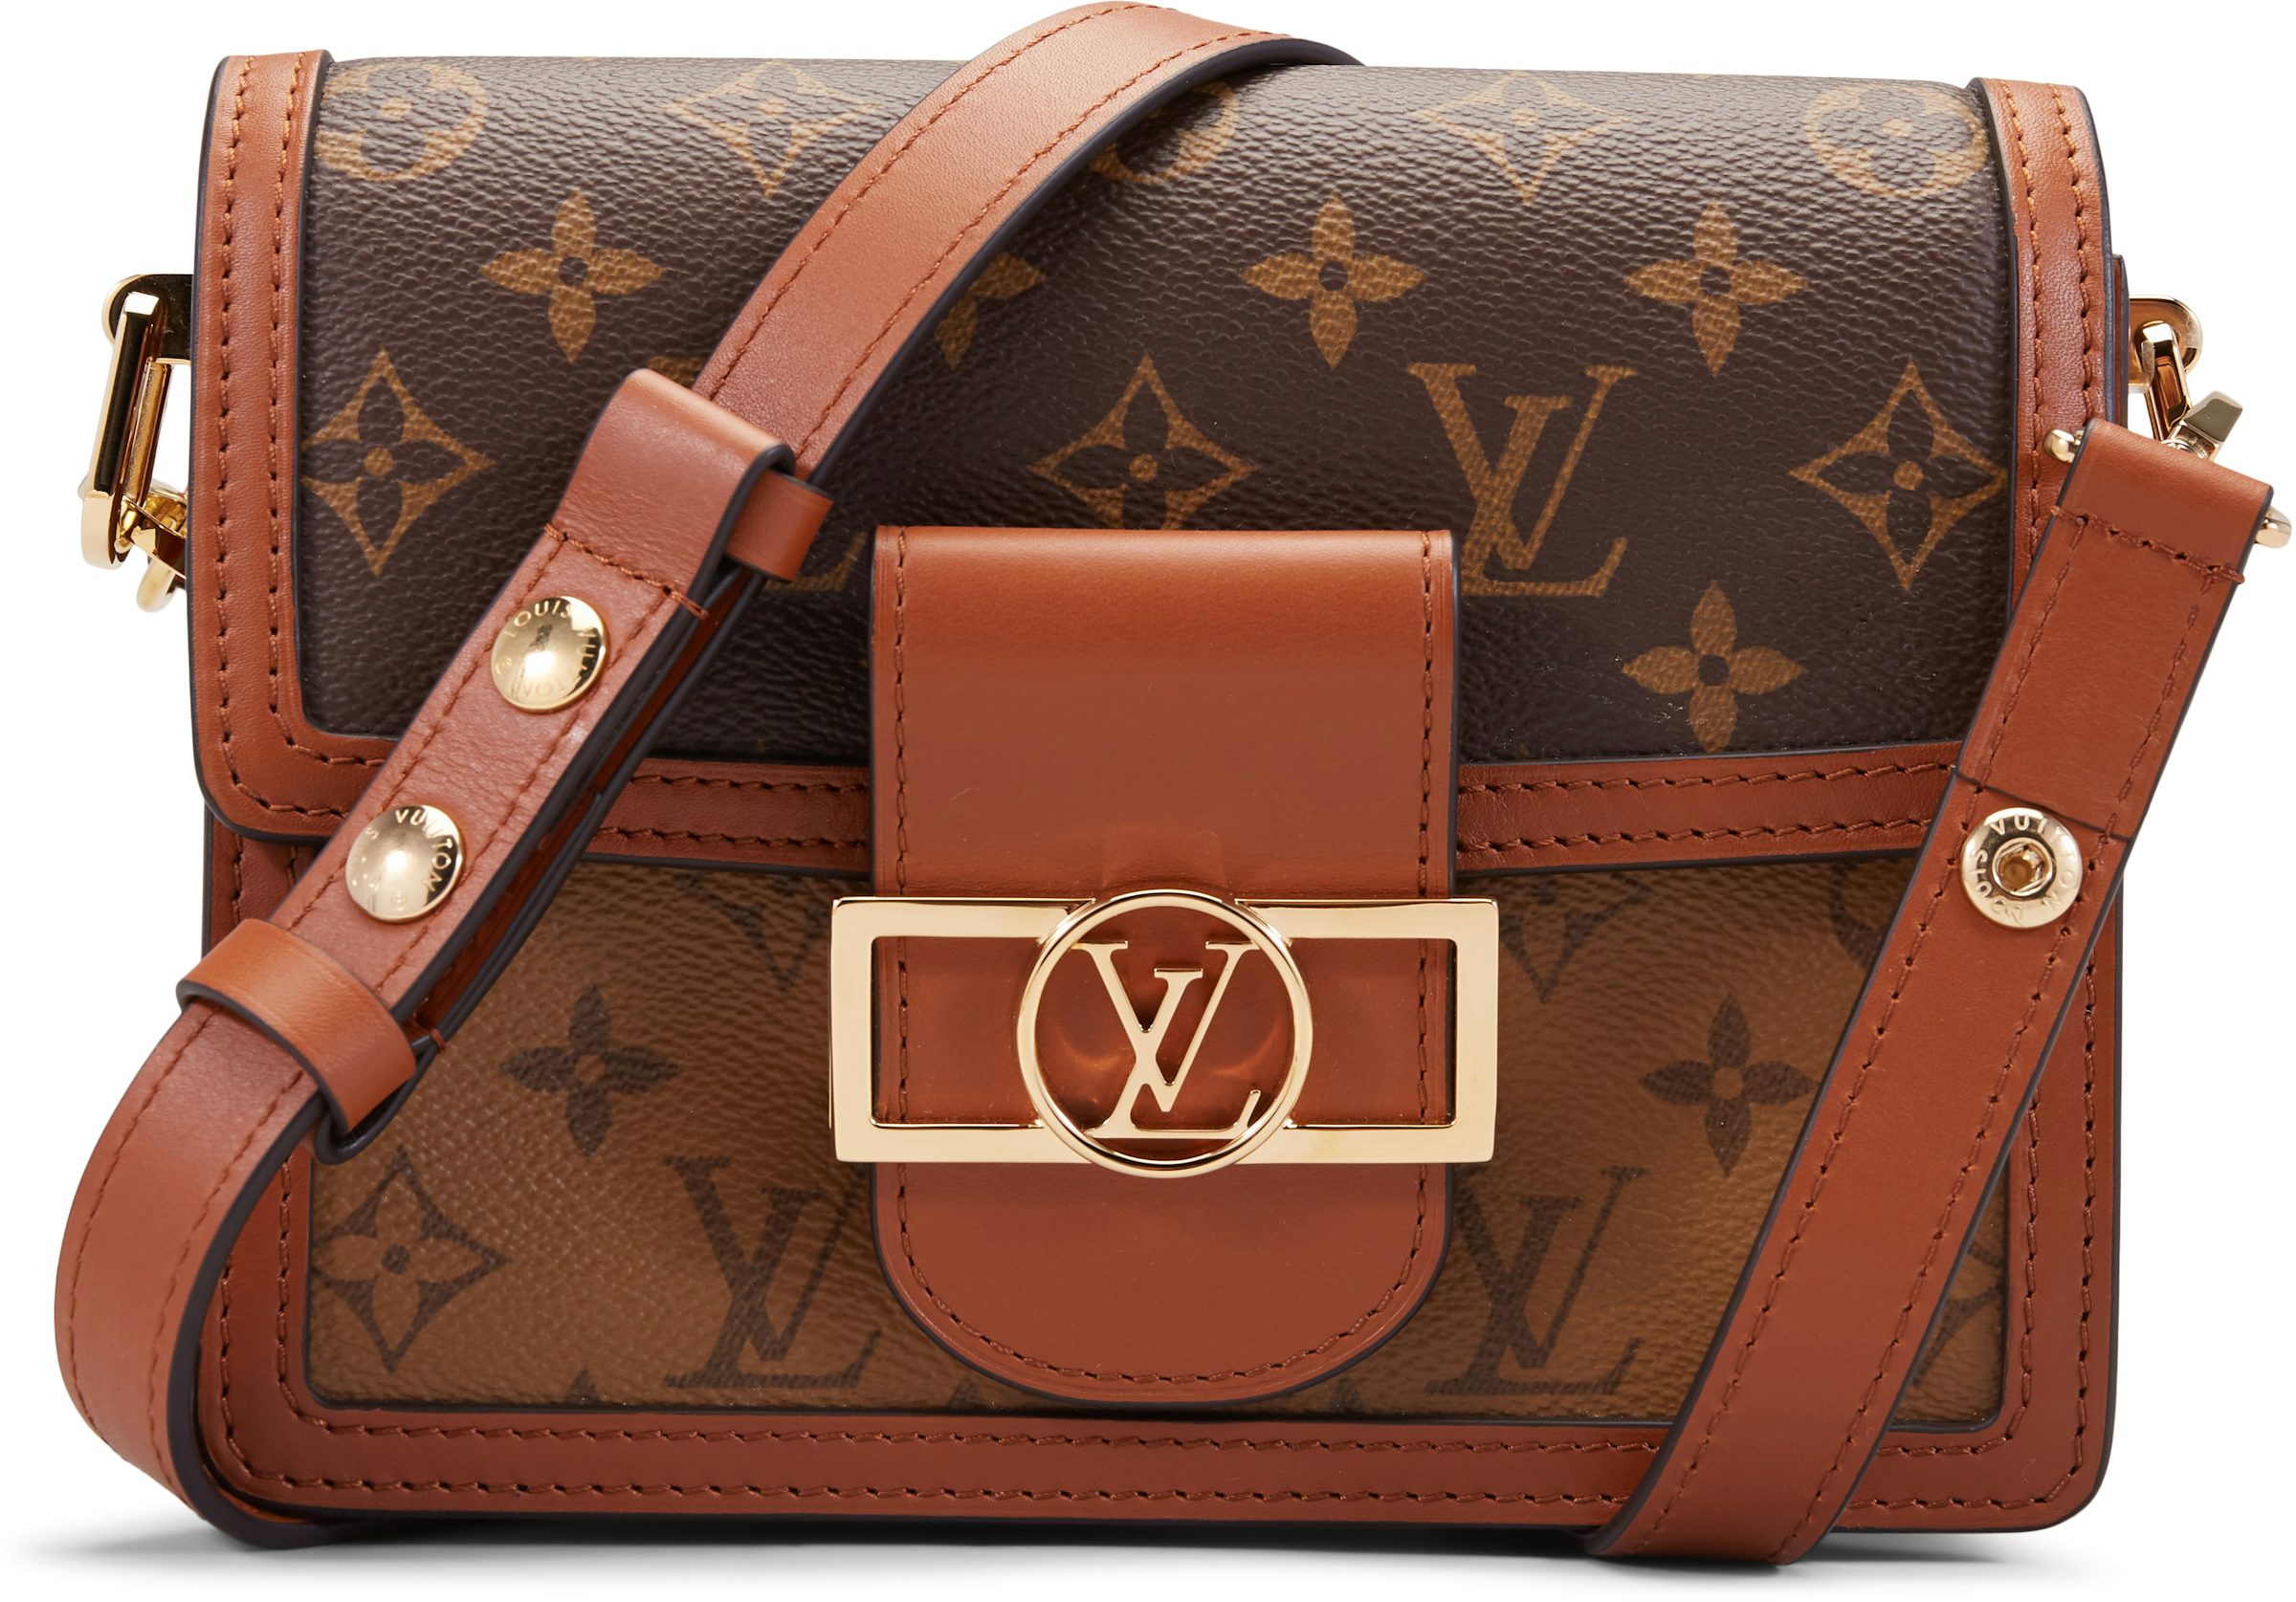 Dauphine belt bag leather mini bag Louis Vuitton Brown in Leather